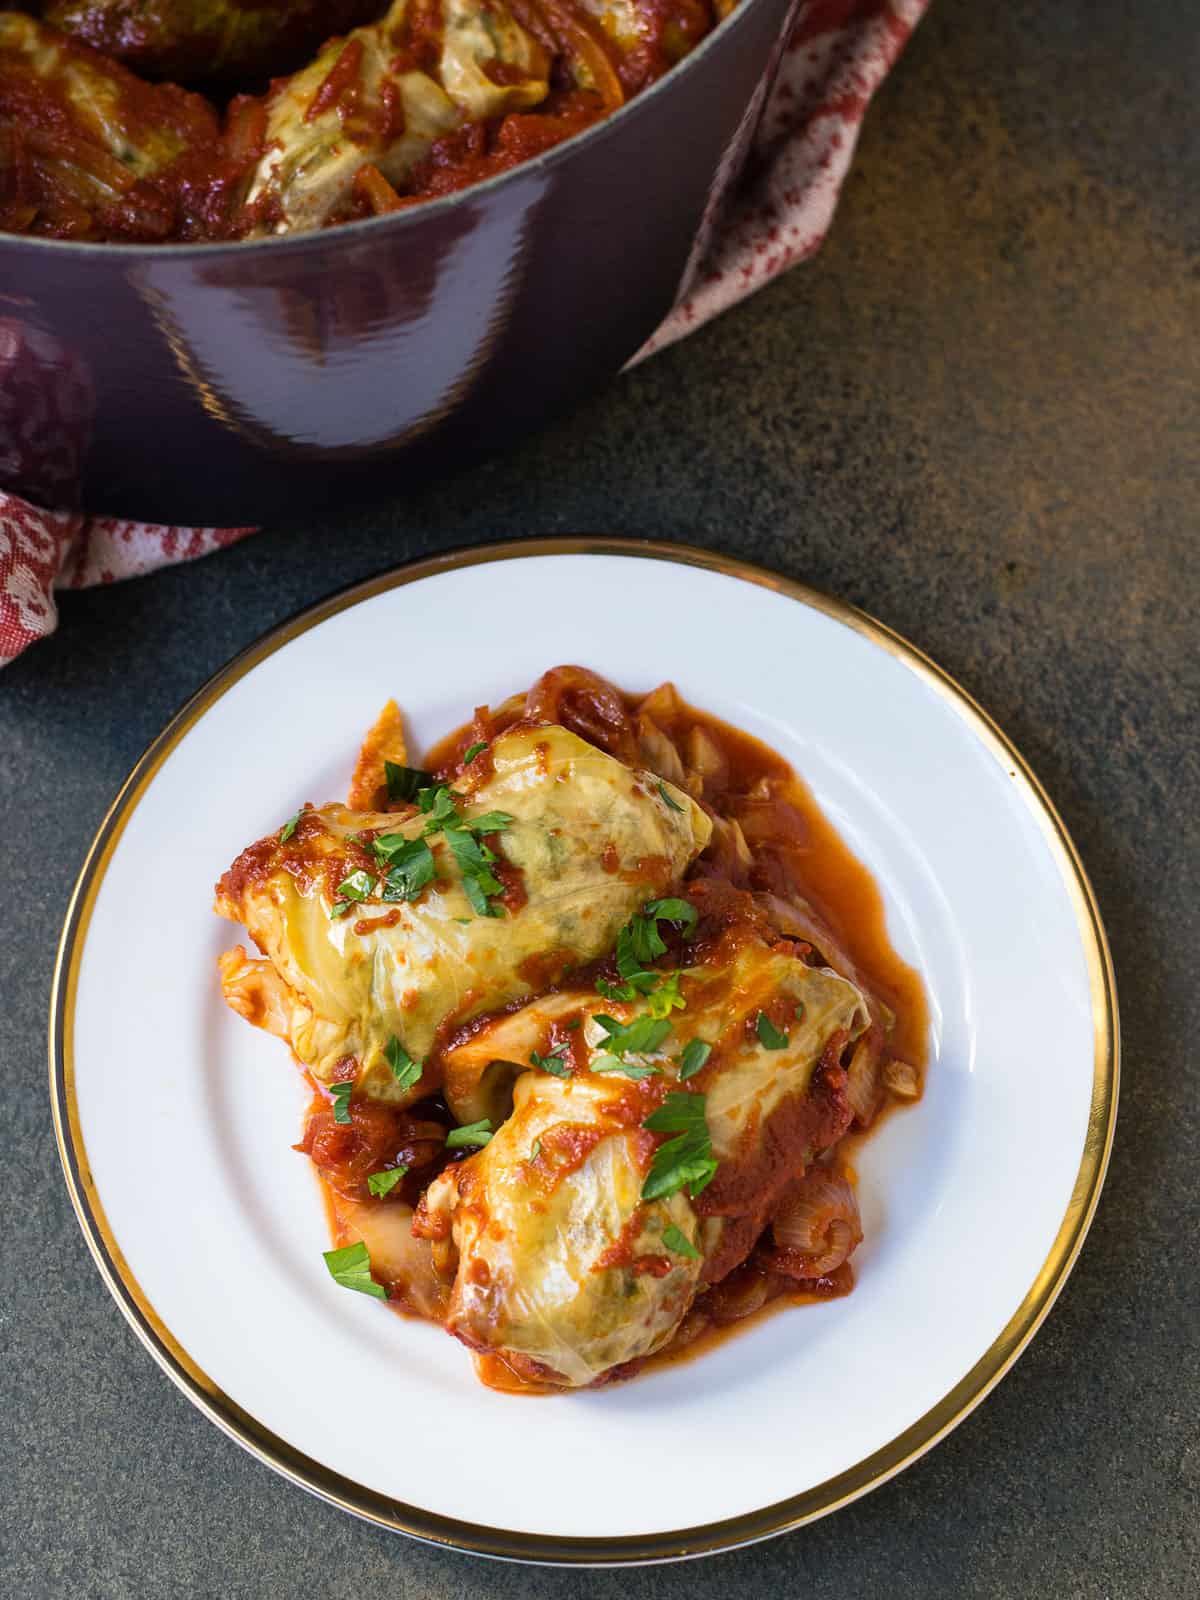 Beef stuffed cabbage rolls in a sweet and sour tomato sauce.